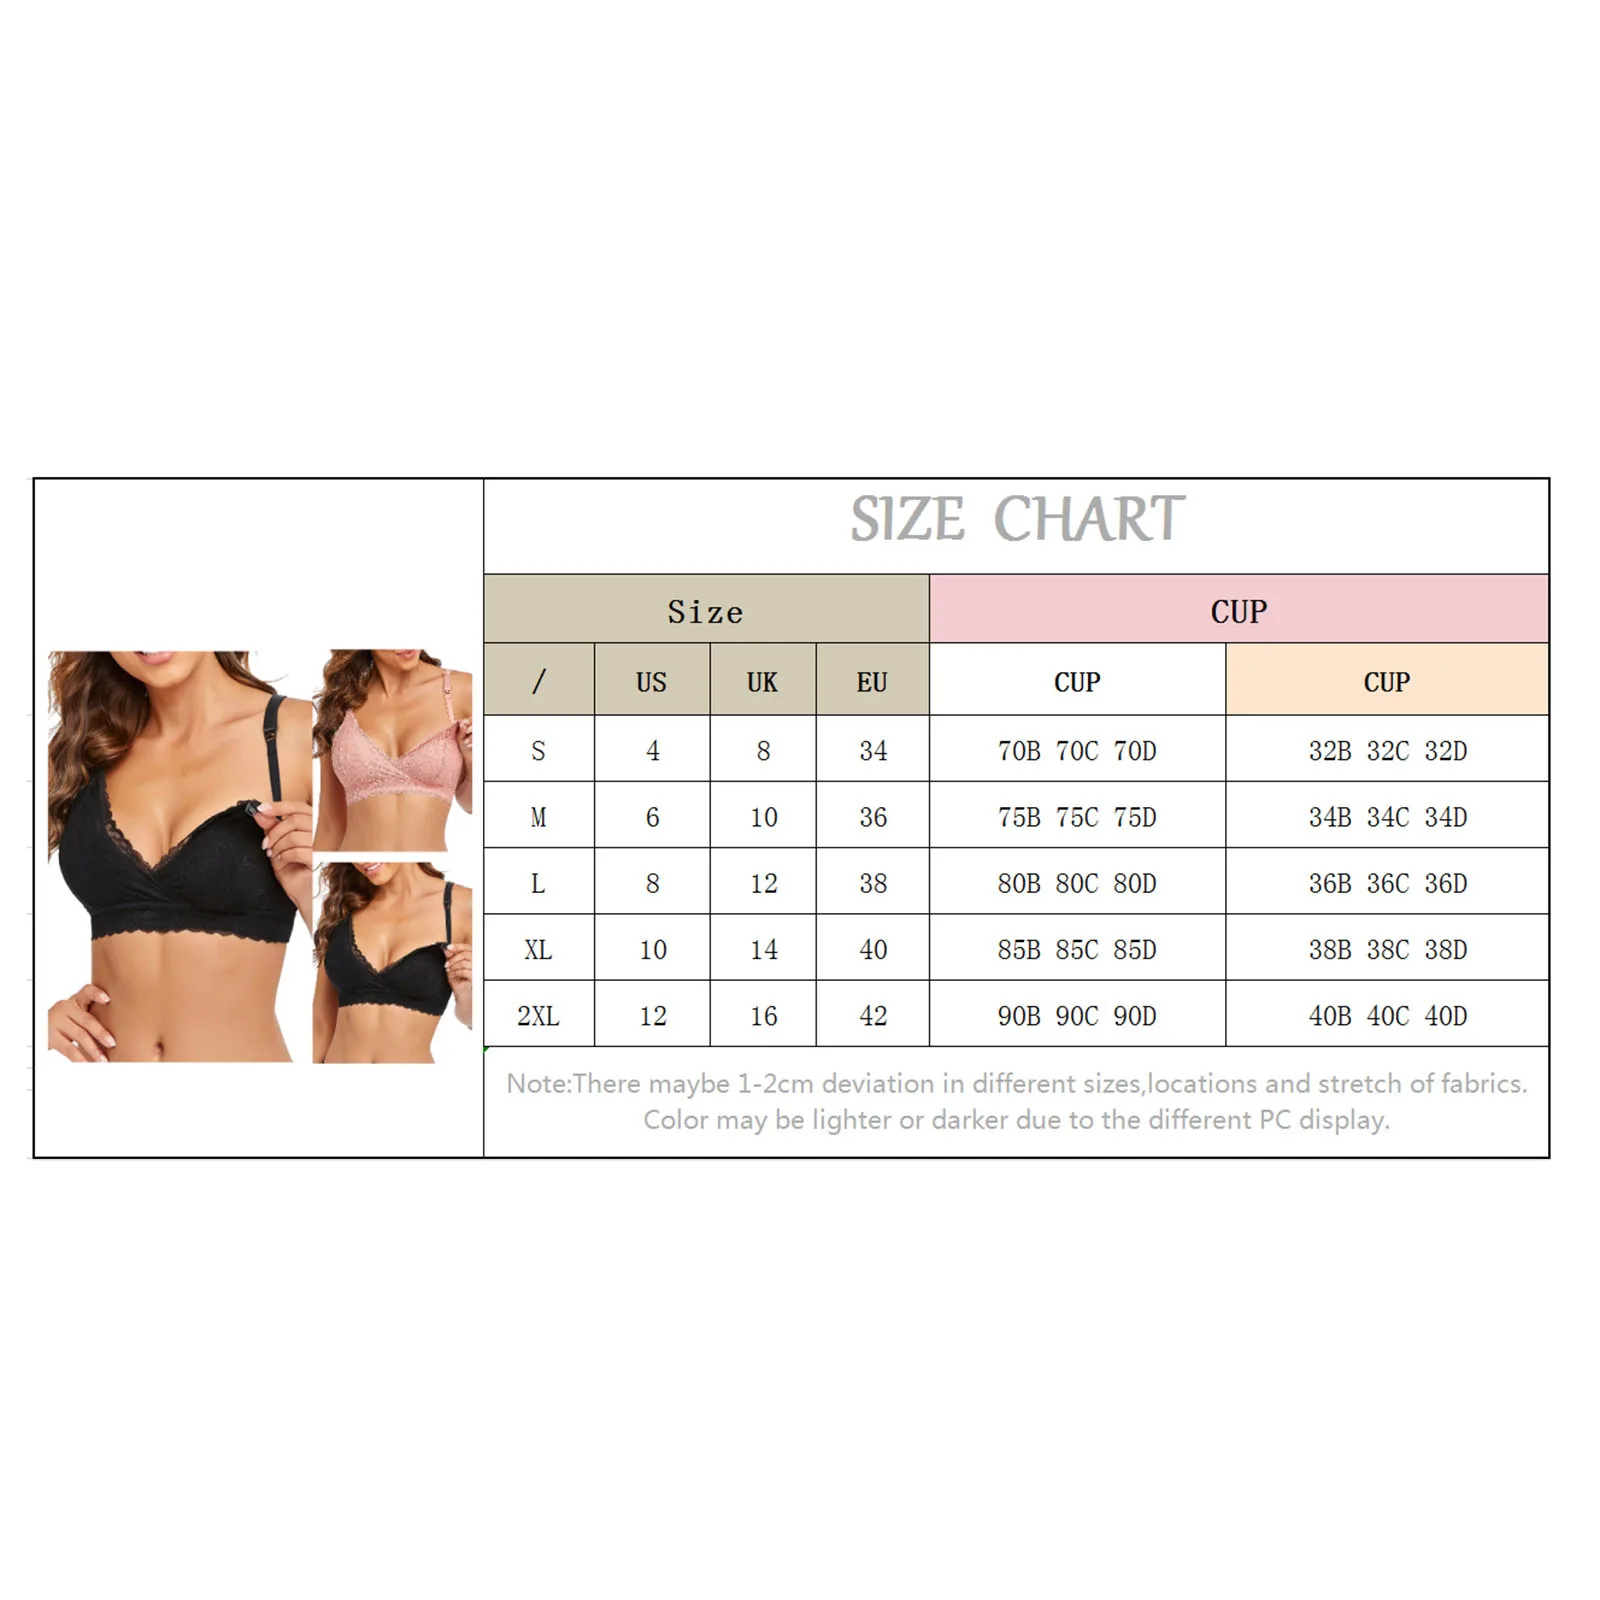 34d, 34b And 34c Cup- What's The Difference?